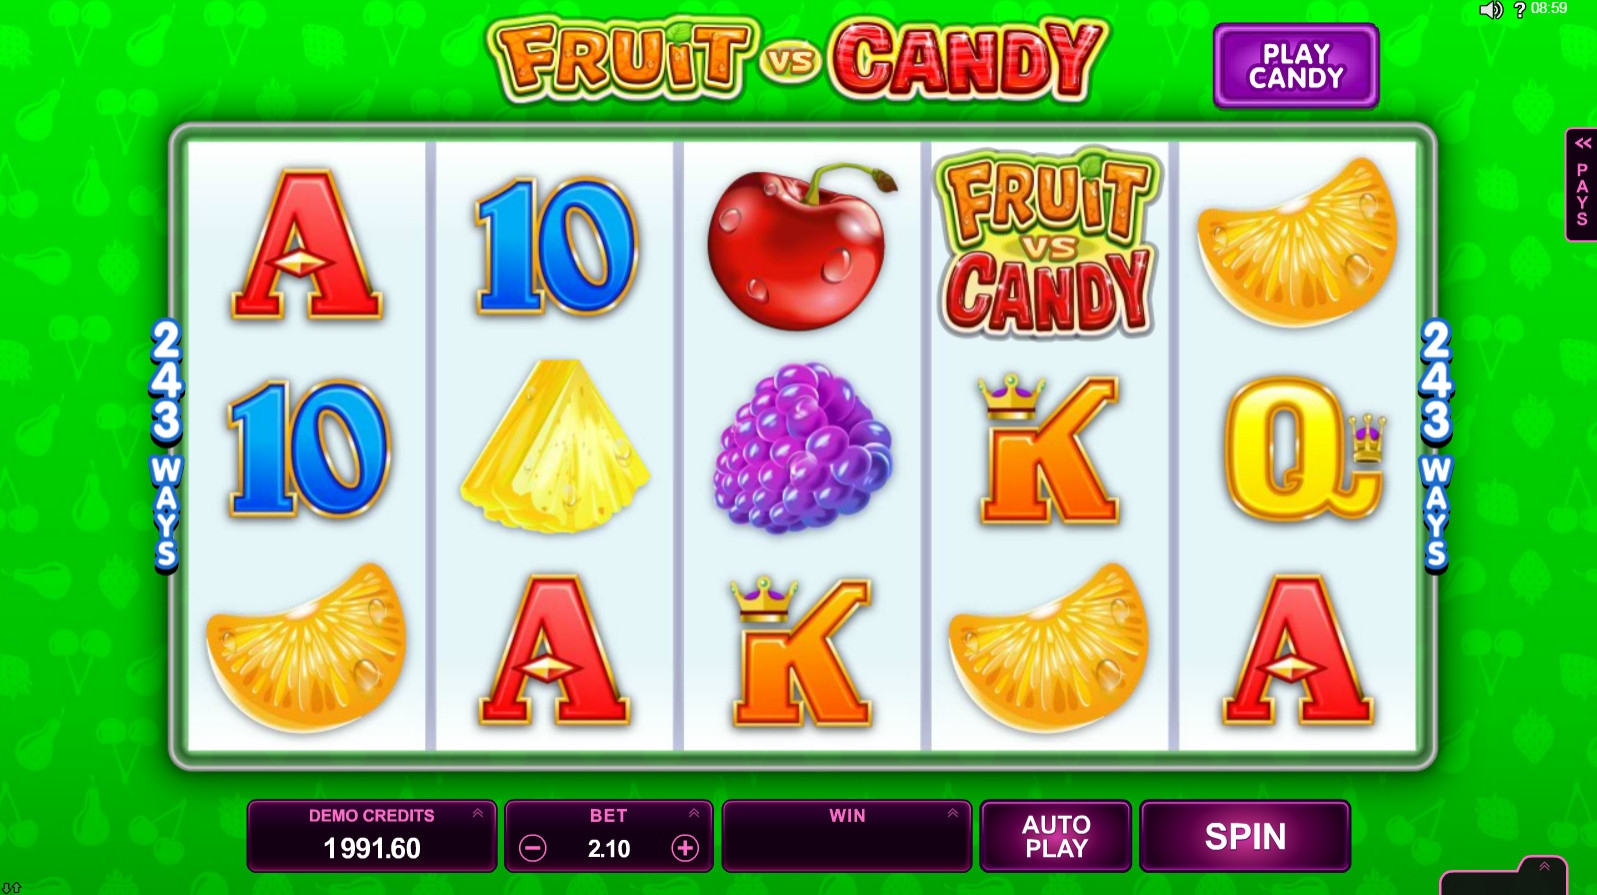 Fruit vs Candy (Fruit vs Candy) from category Slots